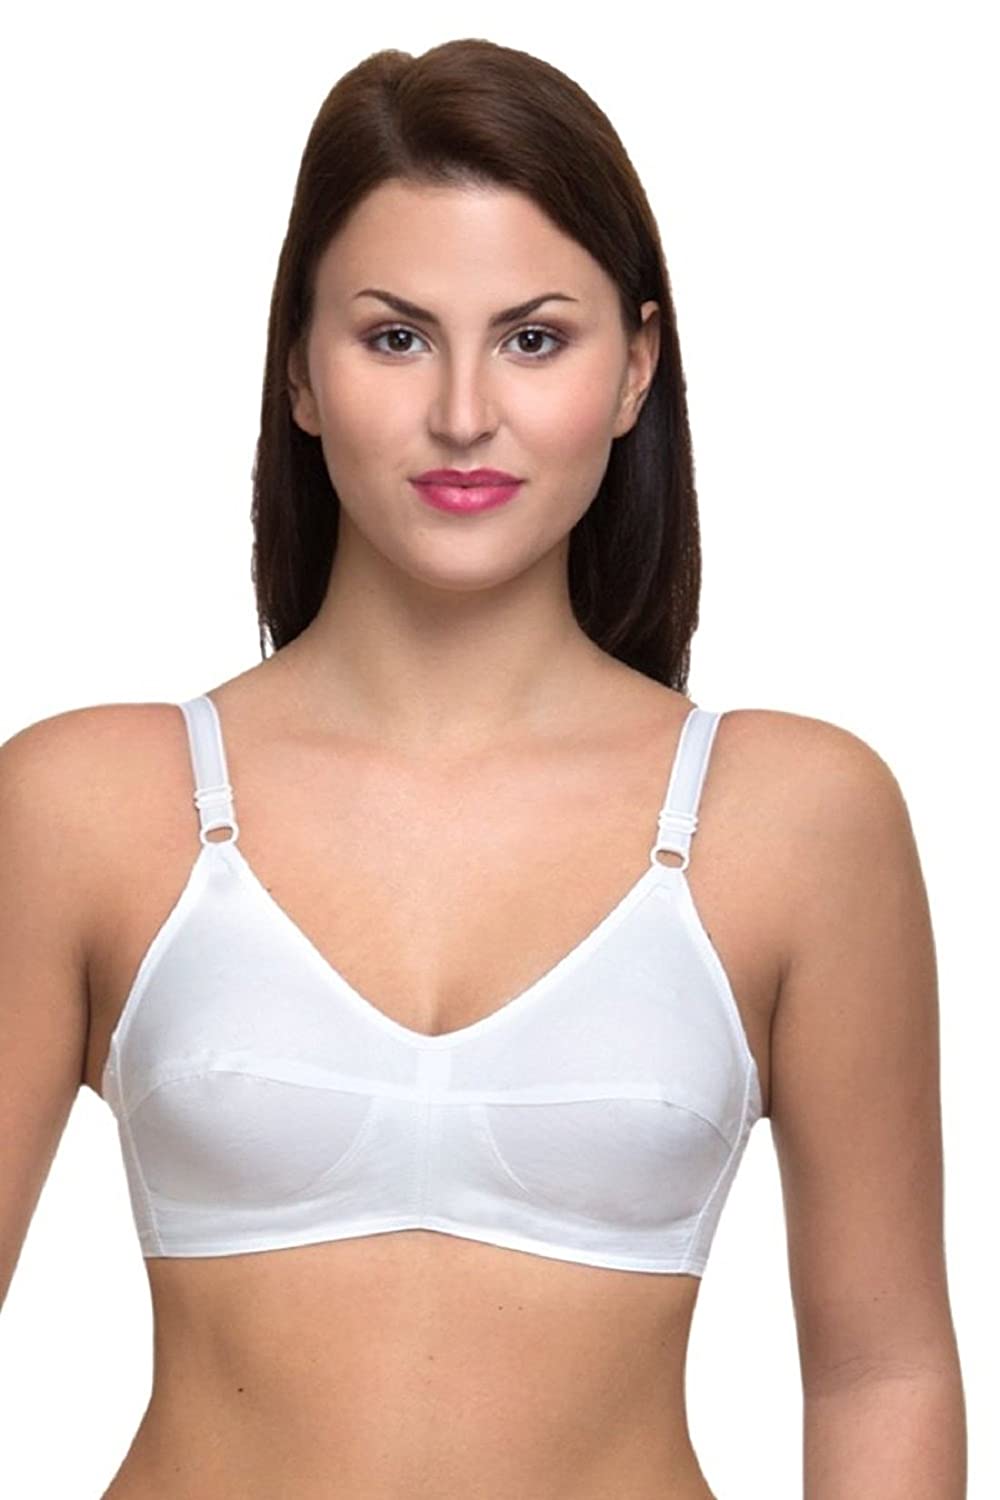 Groversons Bra, Groversons, Lingerie Products